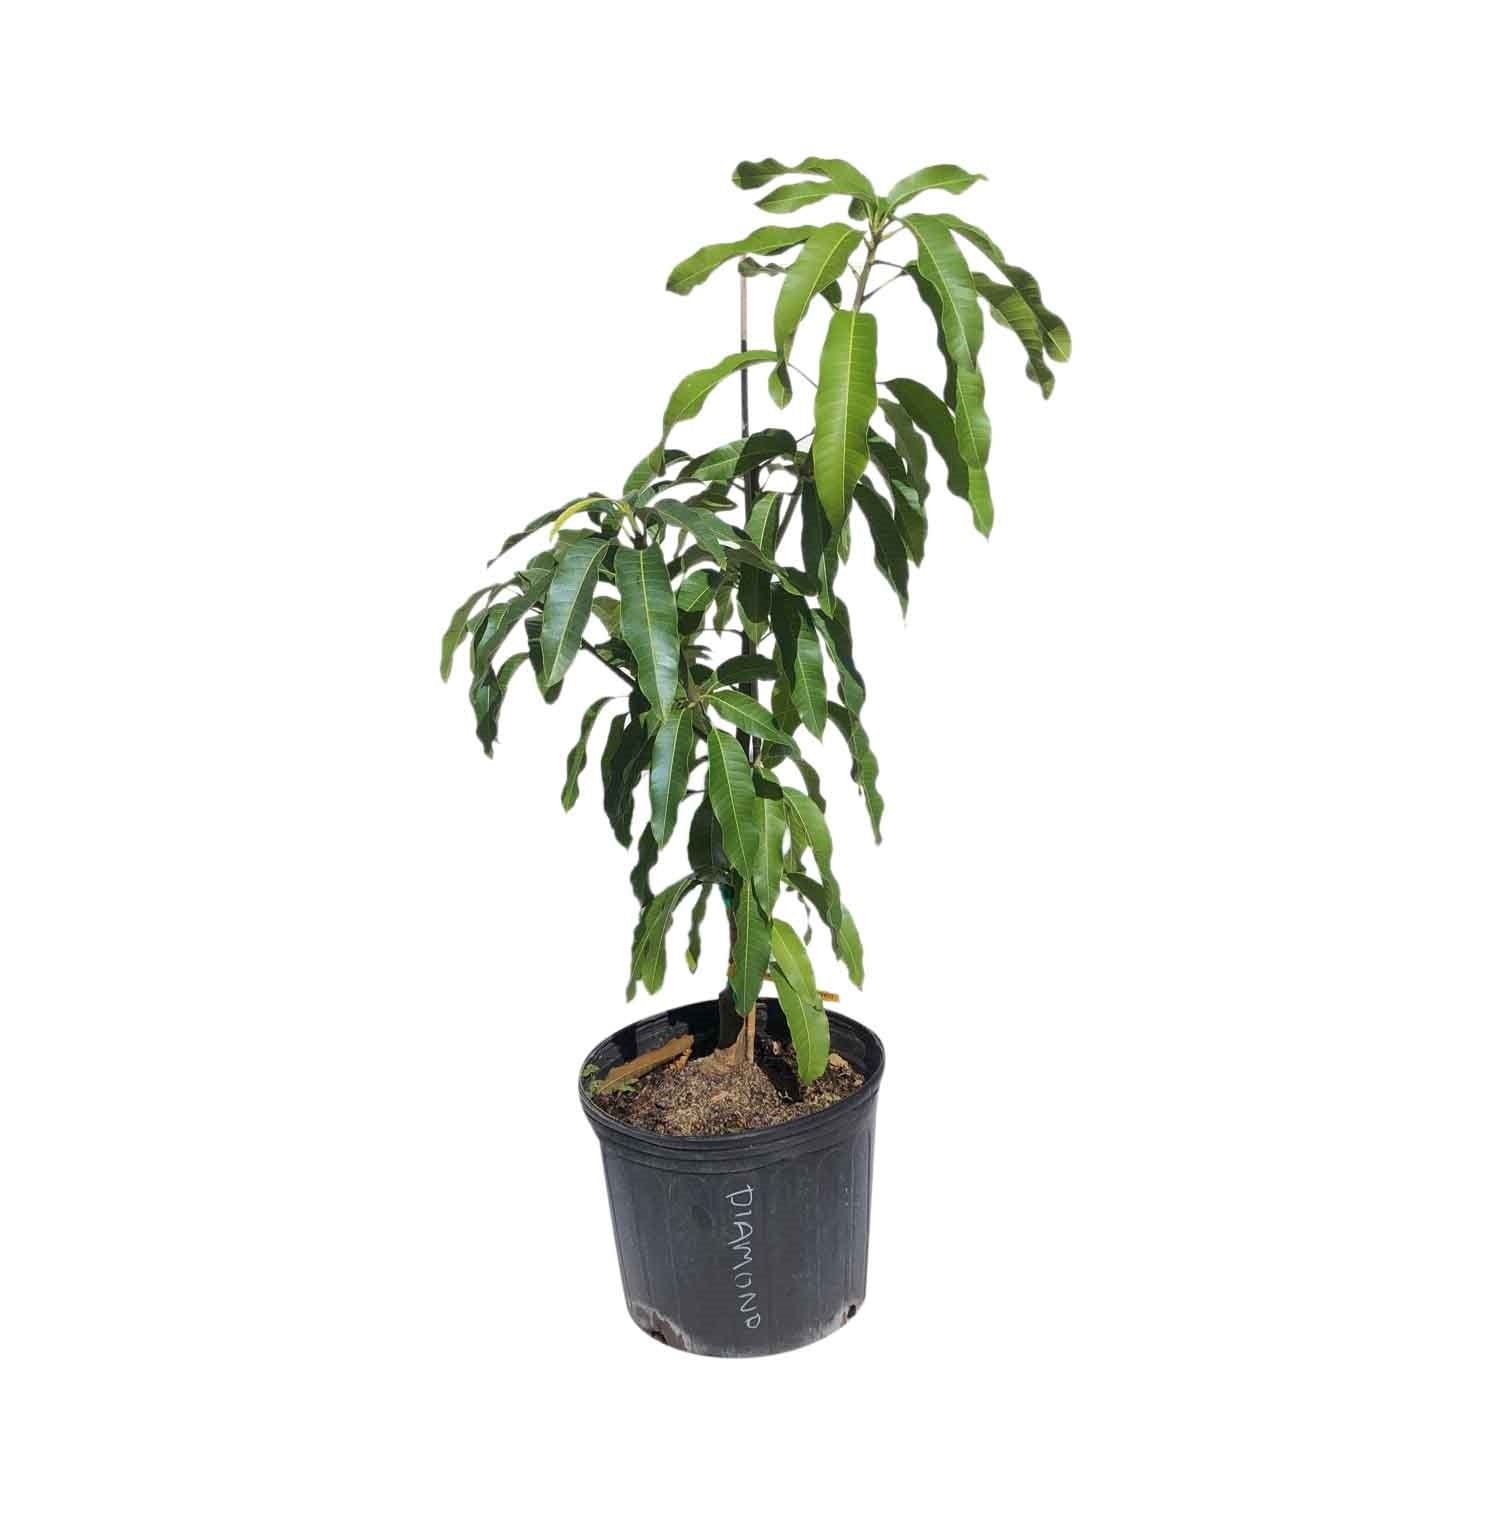 Diamond Mango Tree, Grafted, 3 Gal Container from Florida